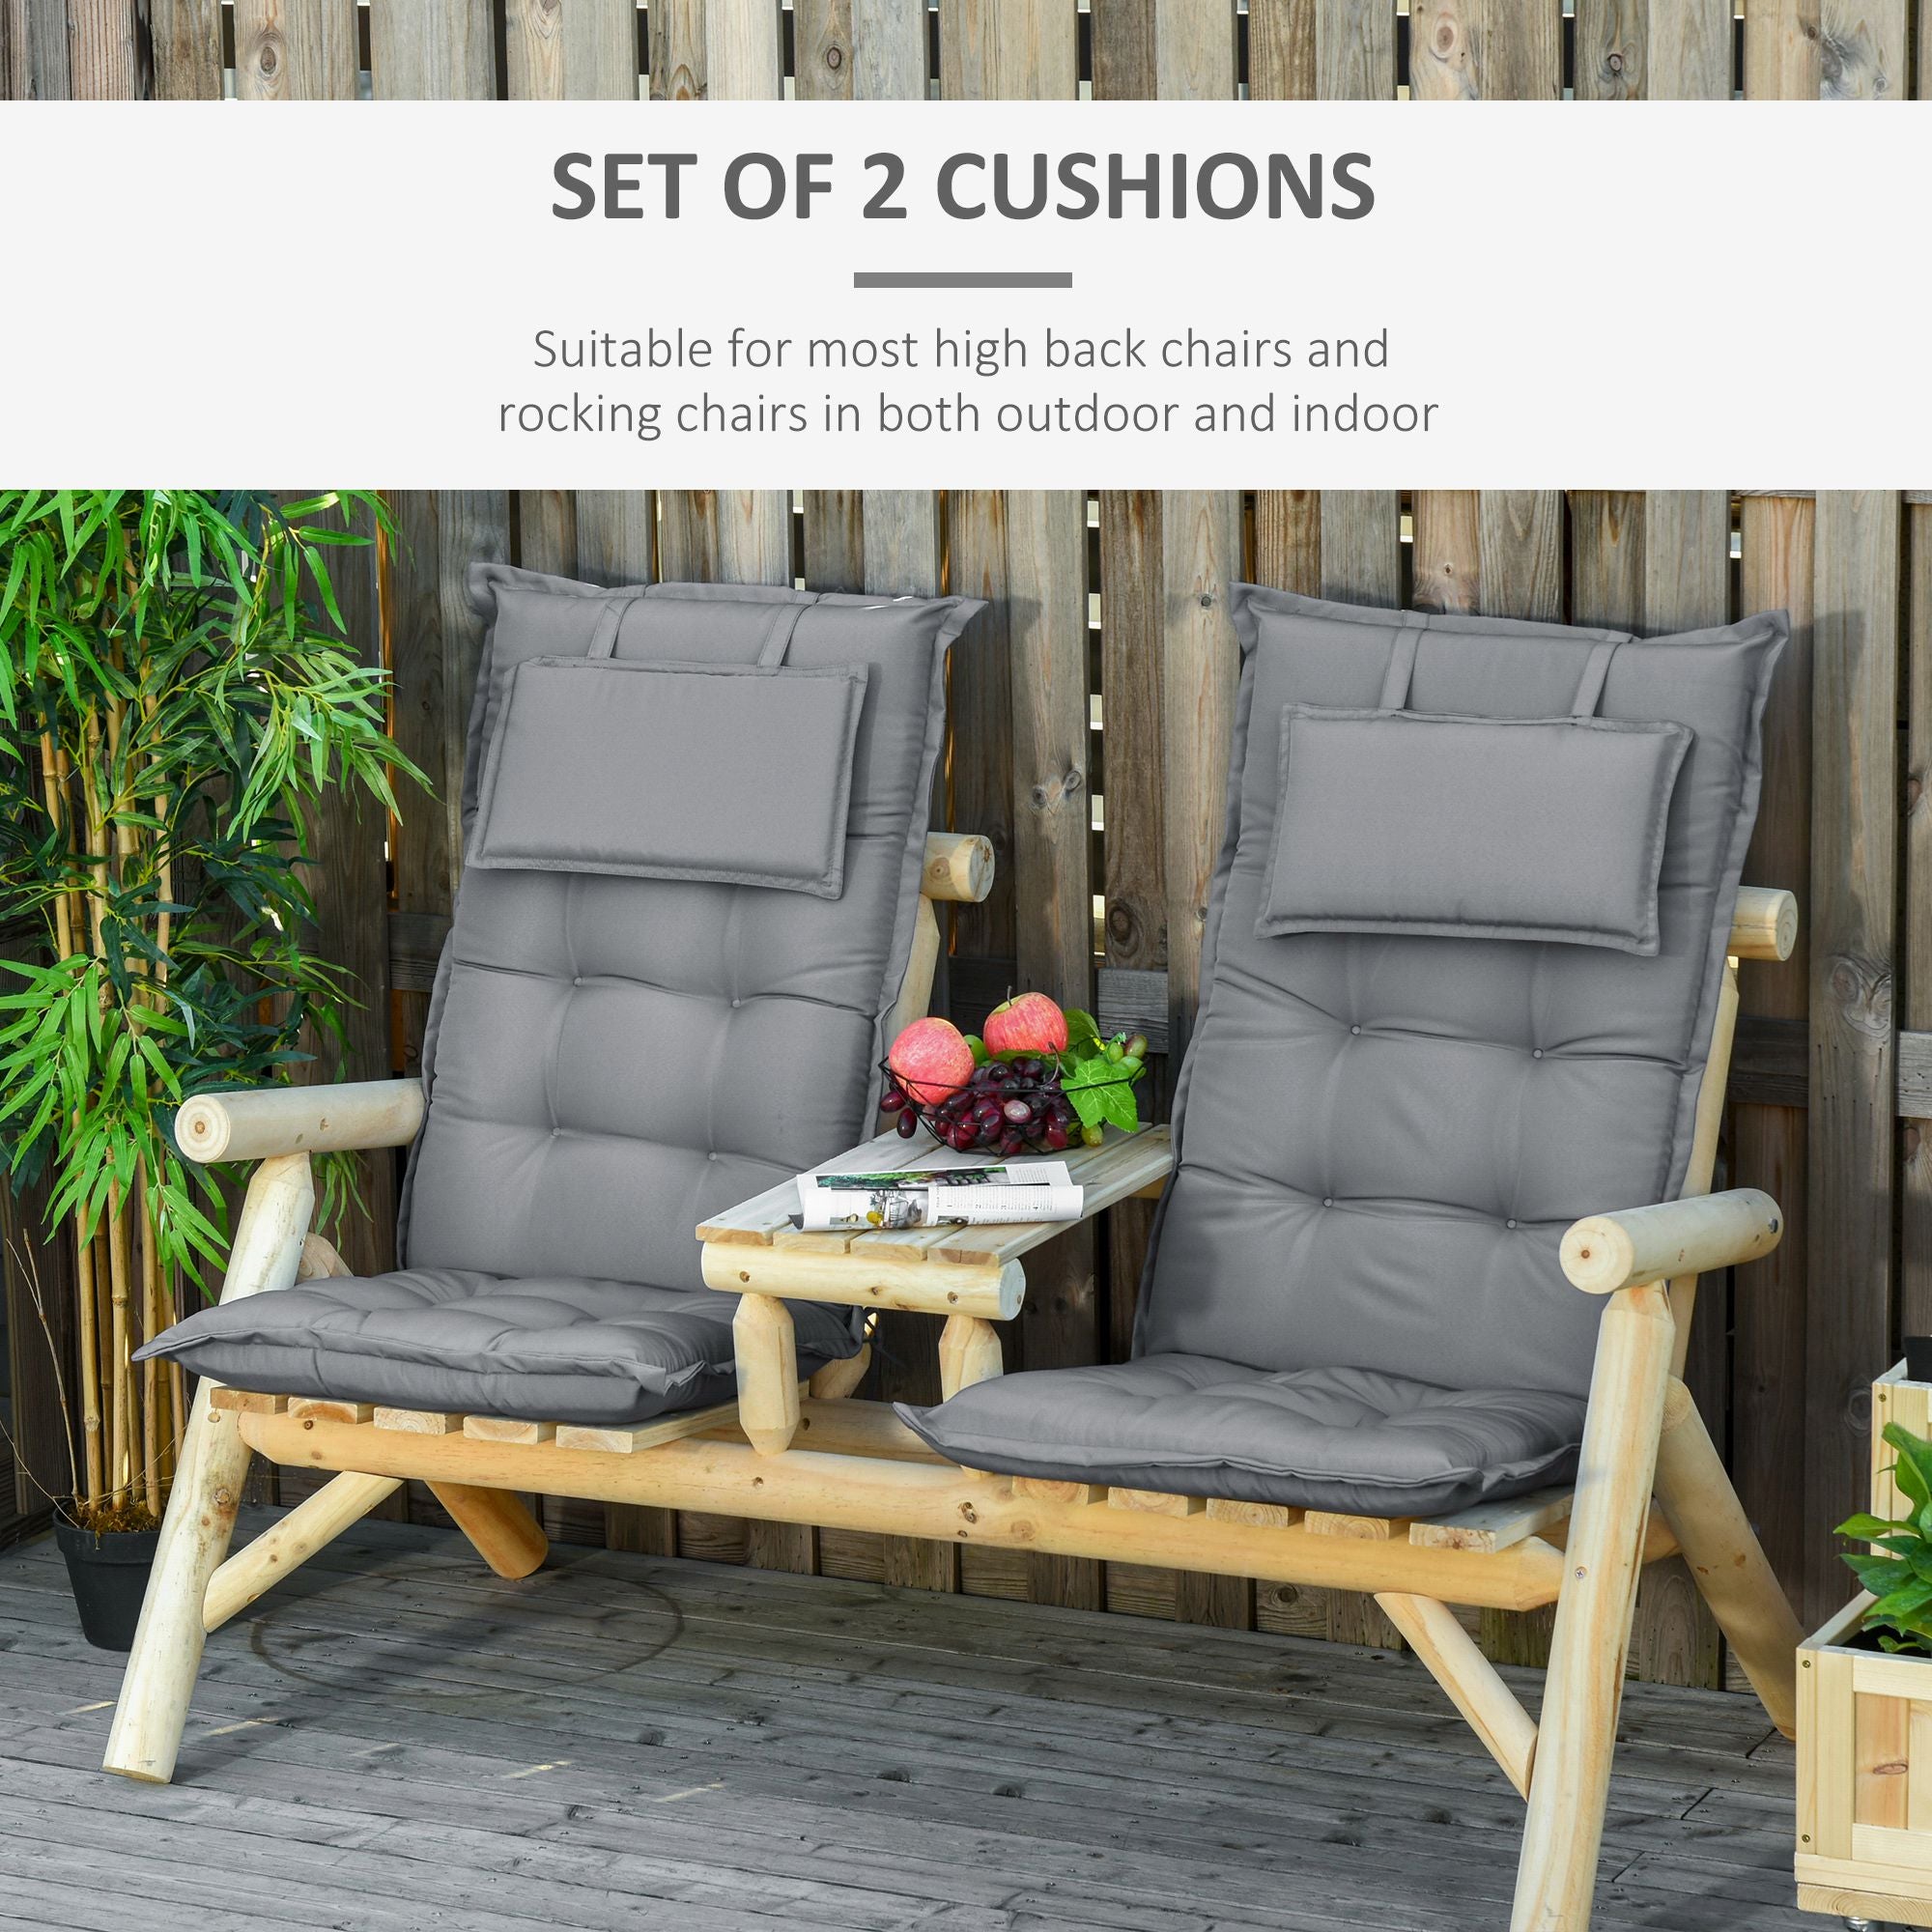 Outsunny Set of 2 Garden Chair Cushion Seat, High Back Dining Chair Padded Patio Chair with Pillow for Indoor and Outdoor Use 120L x 50W x 9D cm - Inspirely